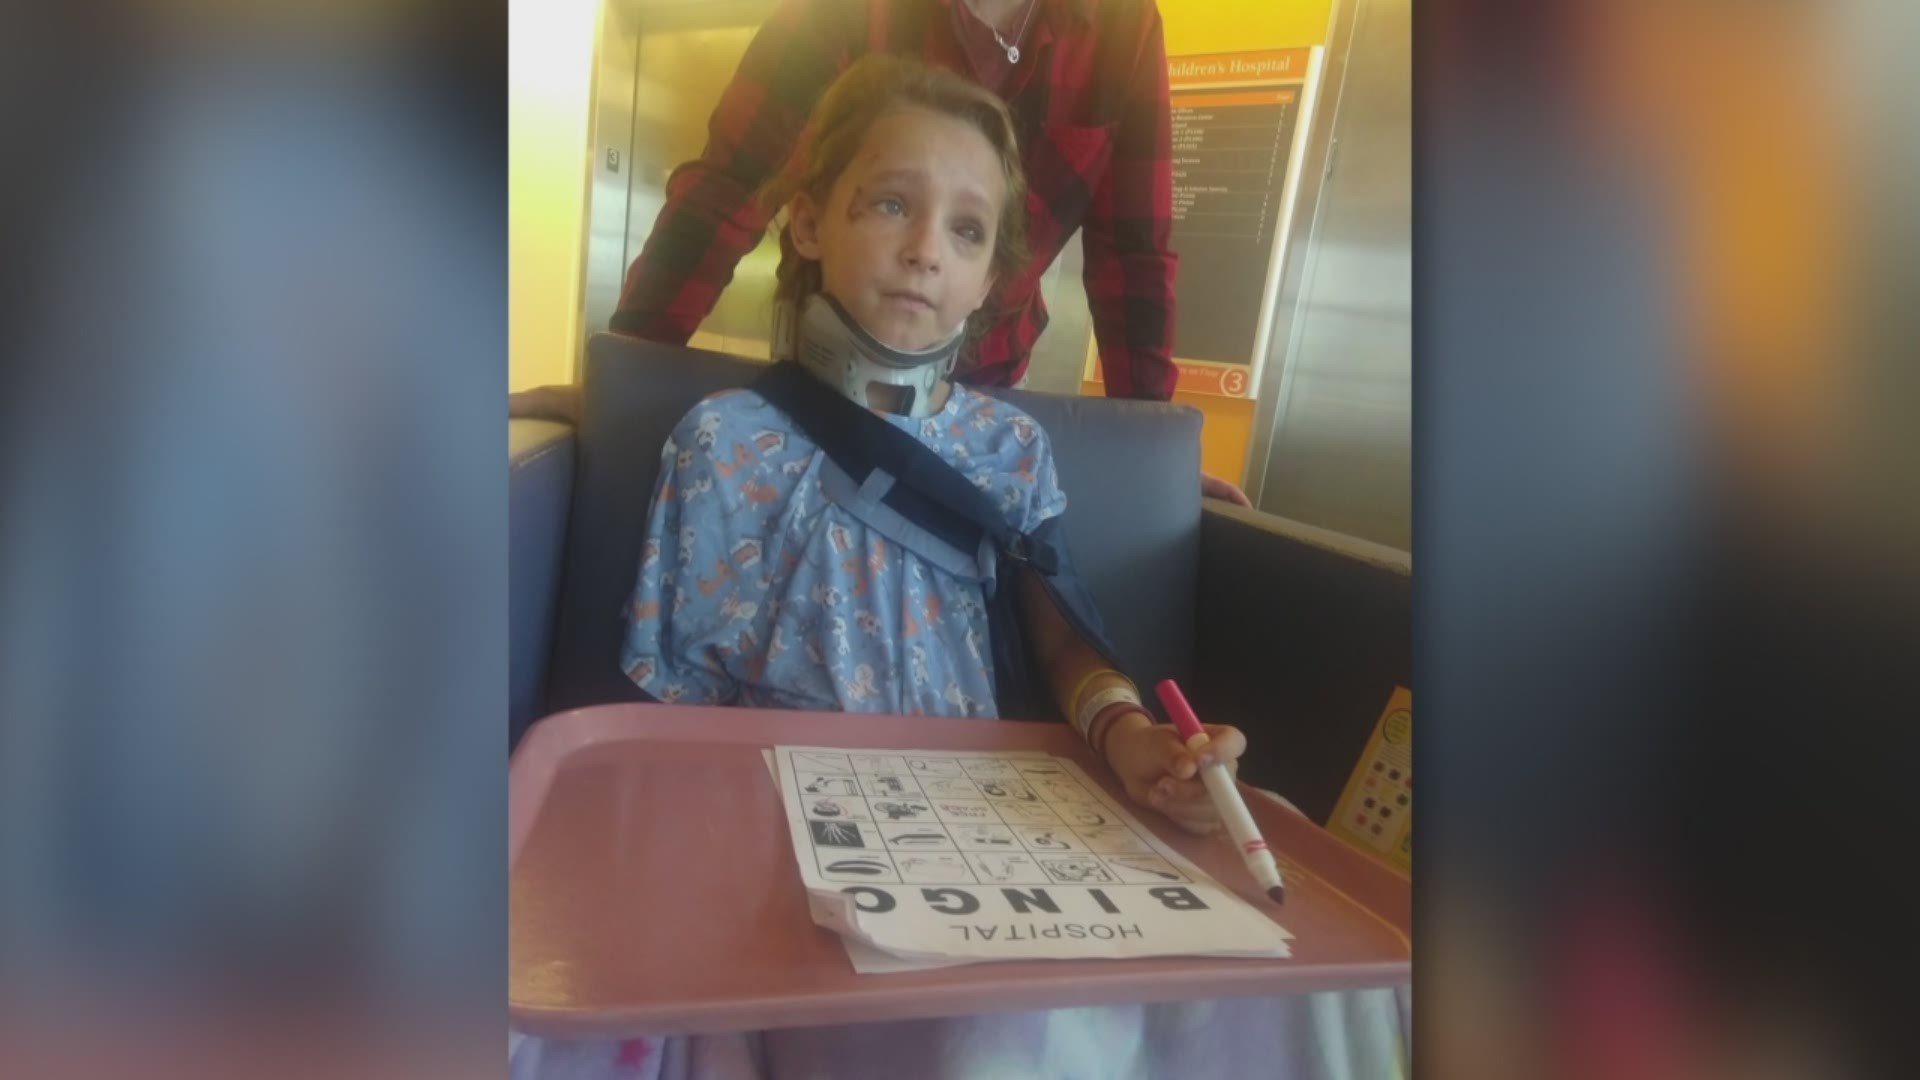 Melissa Negley's 8-year-old daughter, Haley Detman, was run over by a tractor. All she wants to help make her feel better are get-well cards